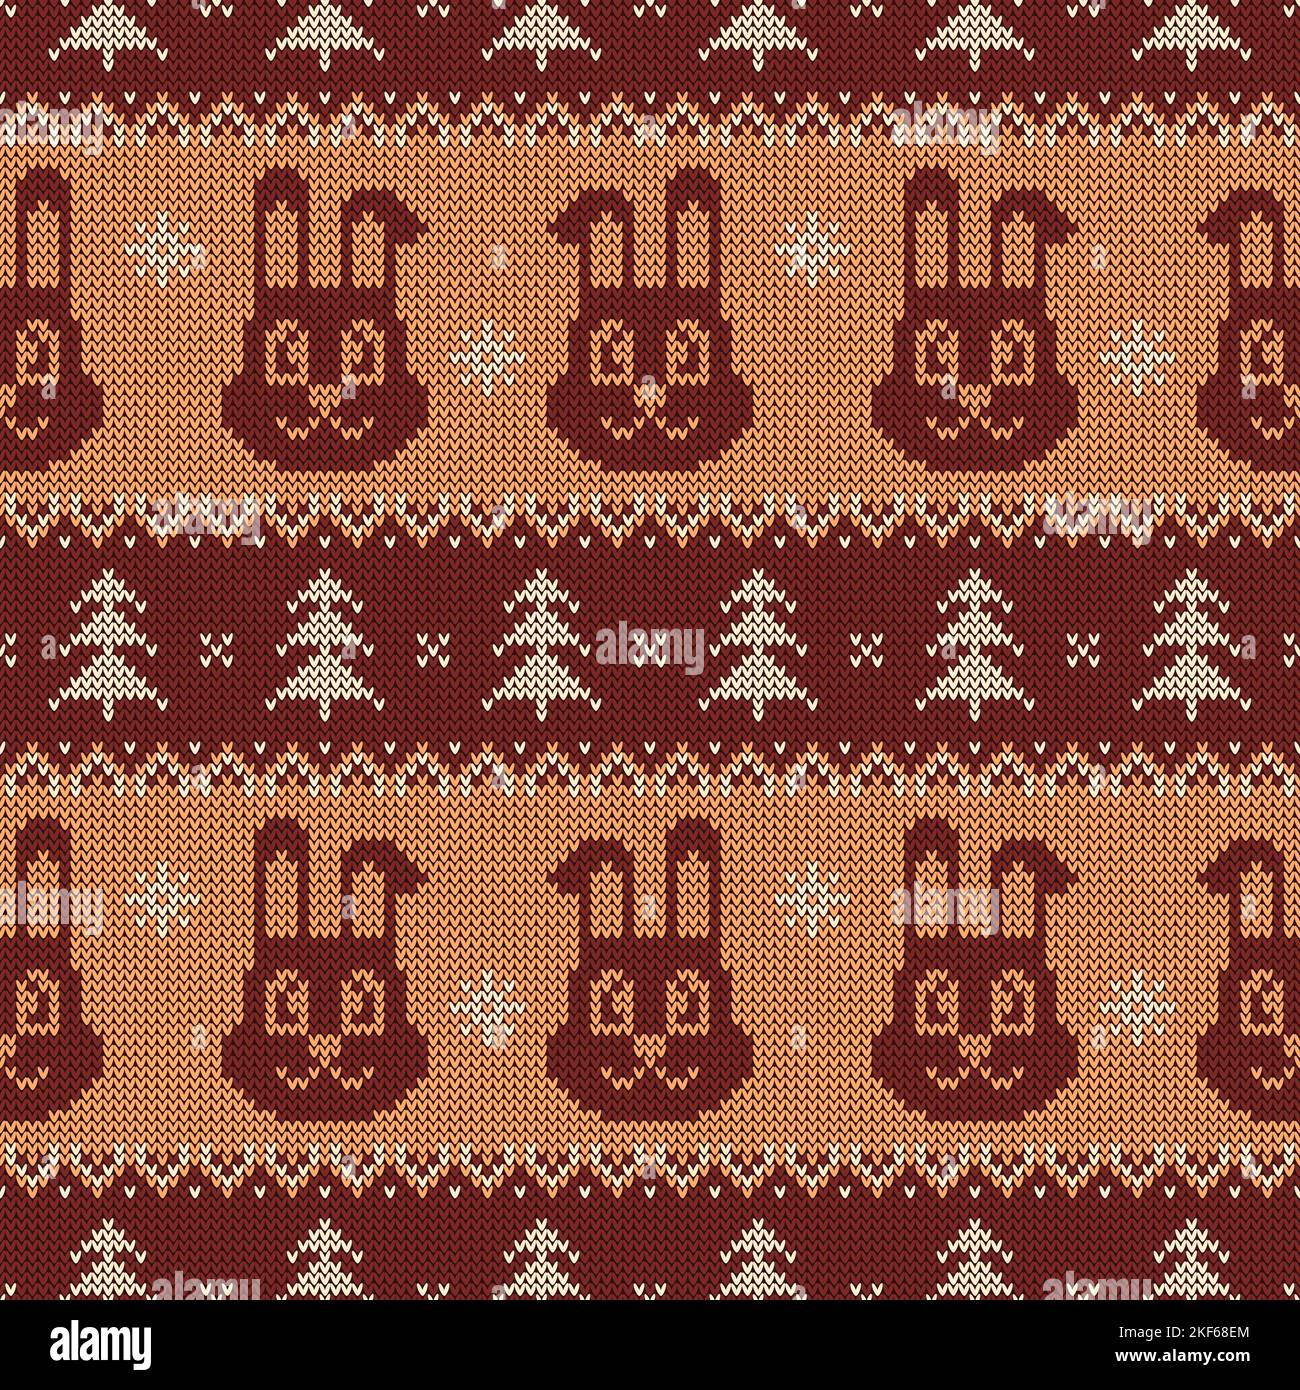 Knitted seamless pattern for 2023 New Year of the Rabbit. Vector ornament with cute bunnies, snowflakes, and Christmas trees. Brown and beige sweater Stock Vector